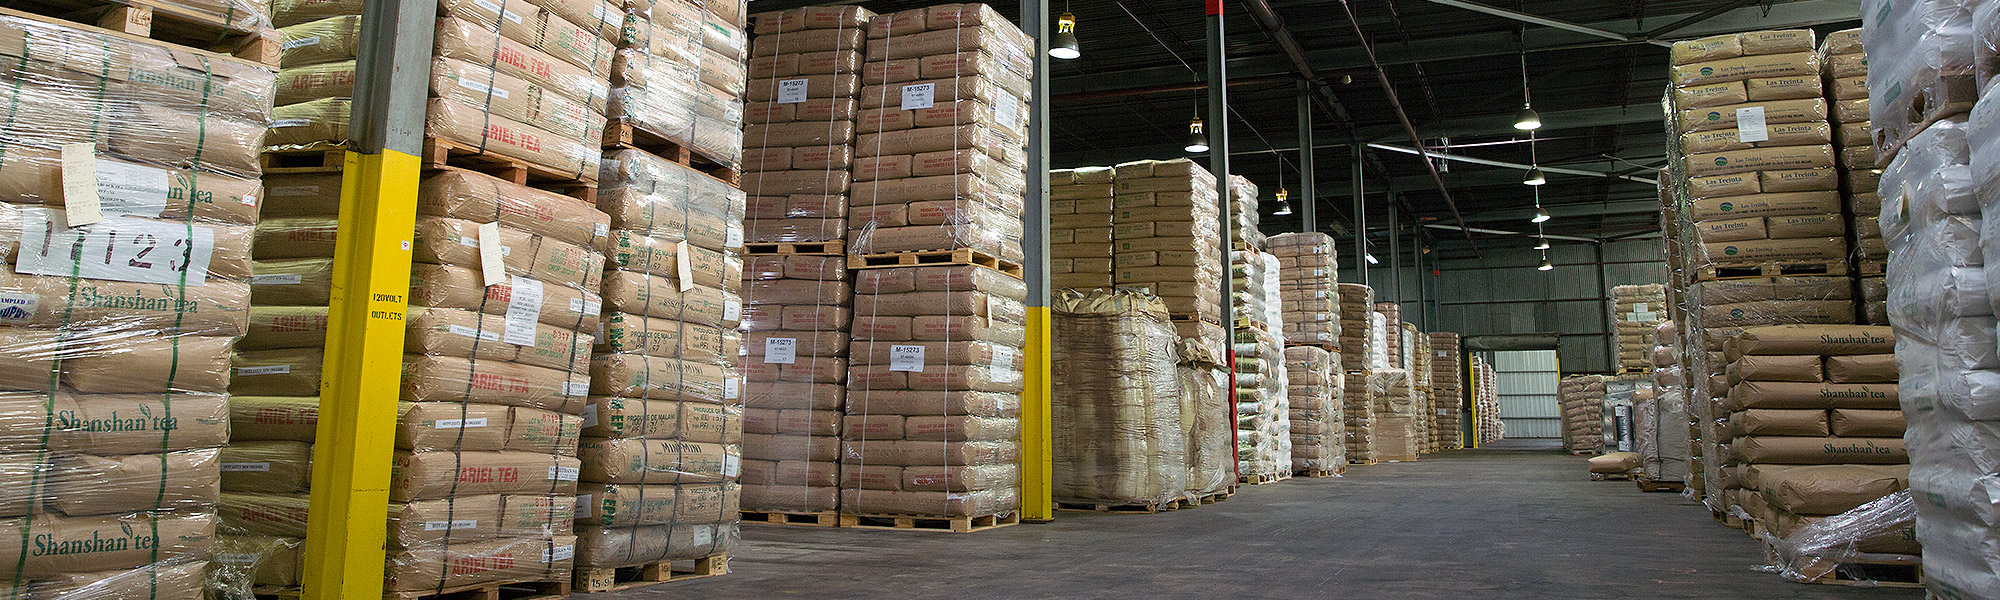 Bags of Tea in a warehouse